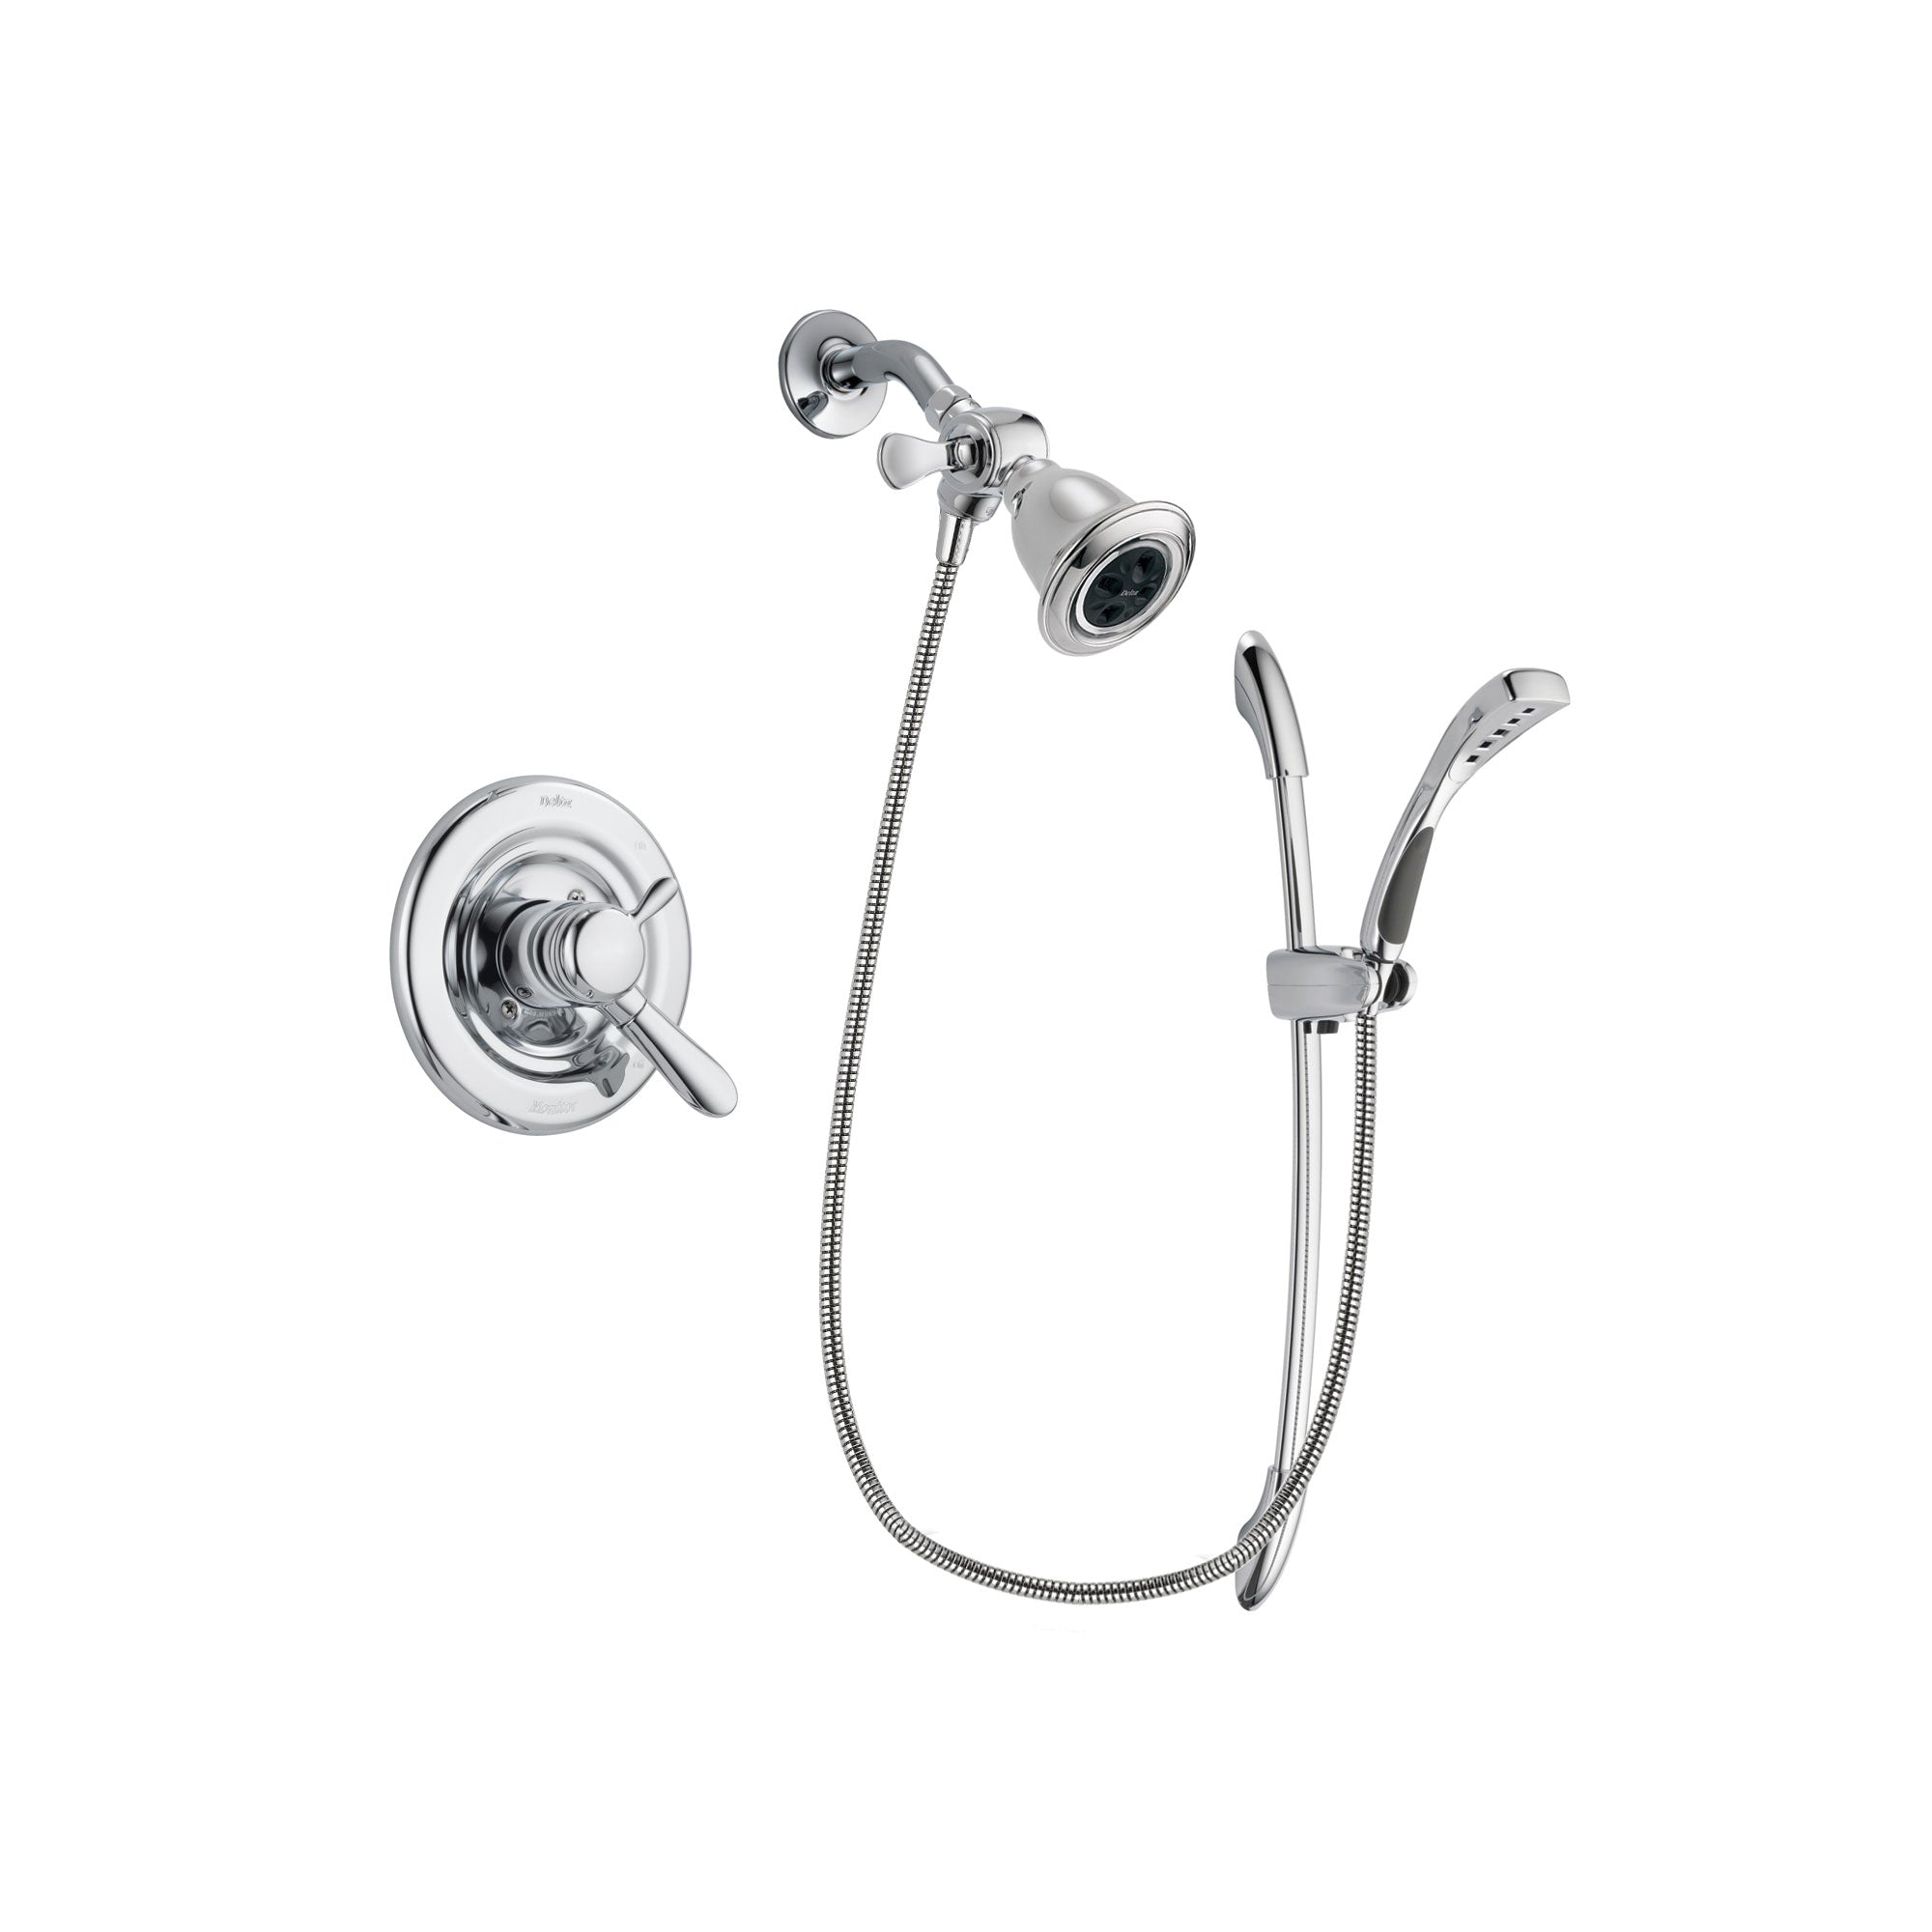 Delta Lahara Chrome Finish Dual Control Shower Faucet System Package with Water Efficient Showerhead and Handheld Shower with Slide Bar Includes Rough-in Valve DSP0480V